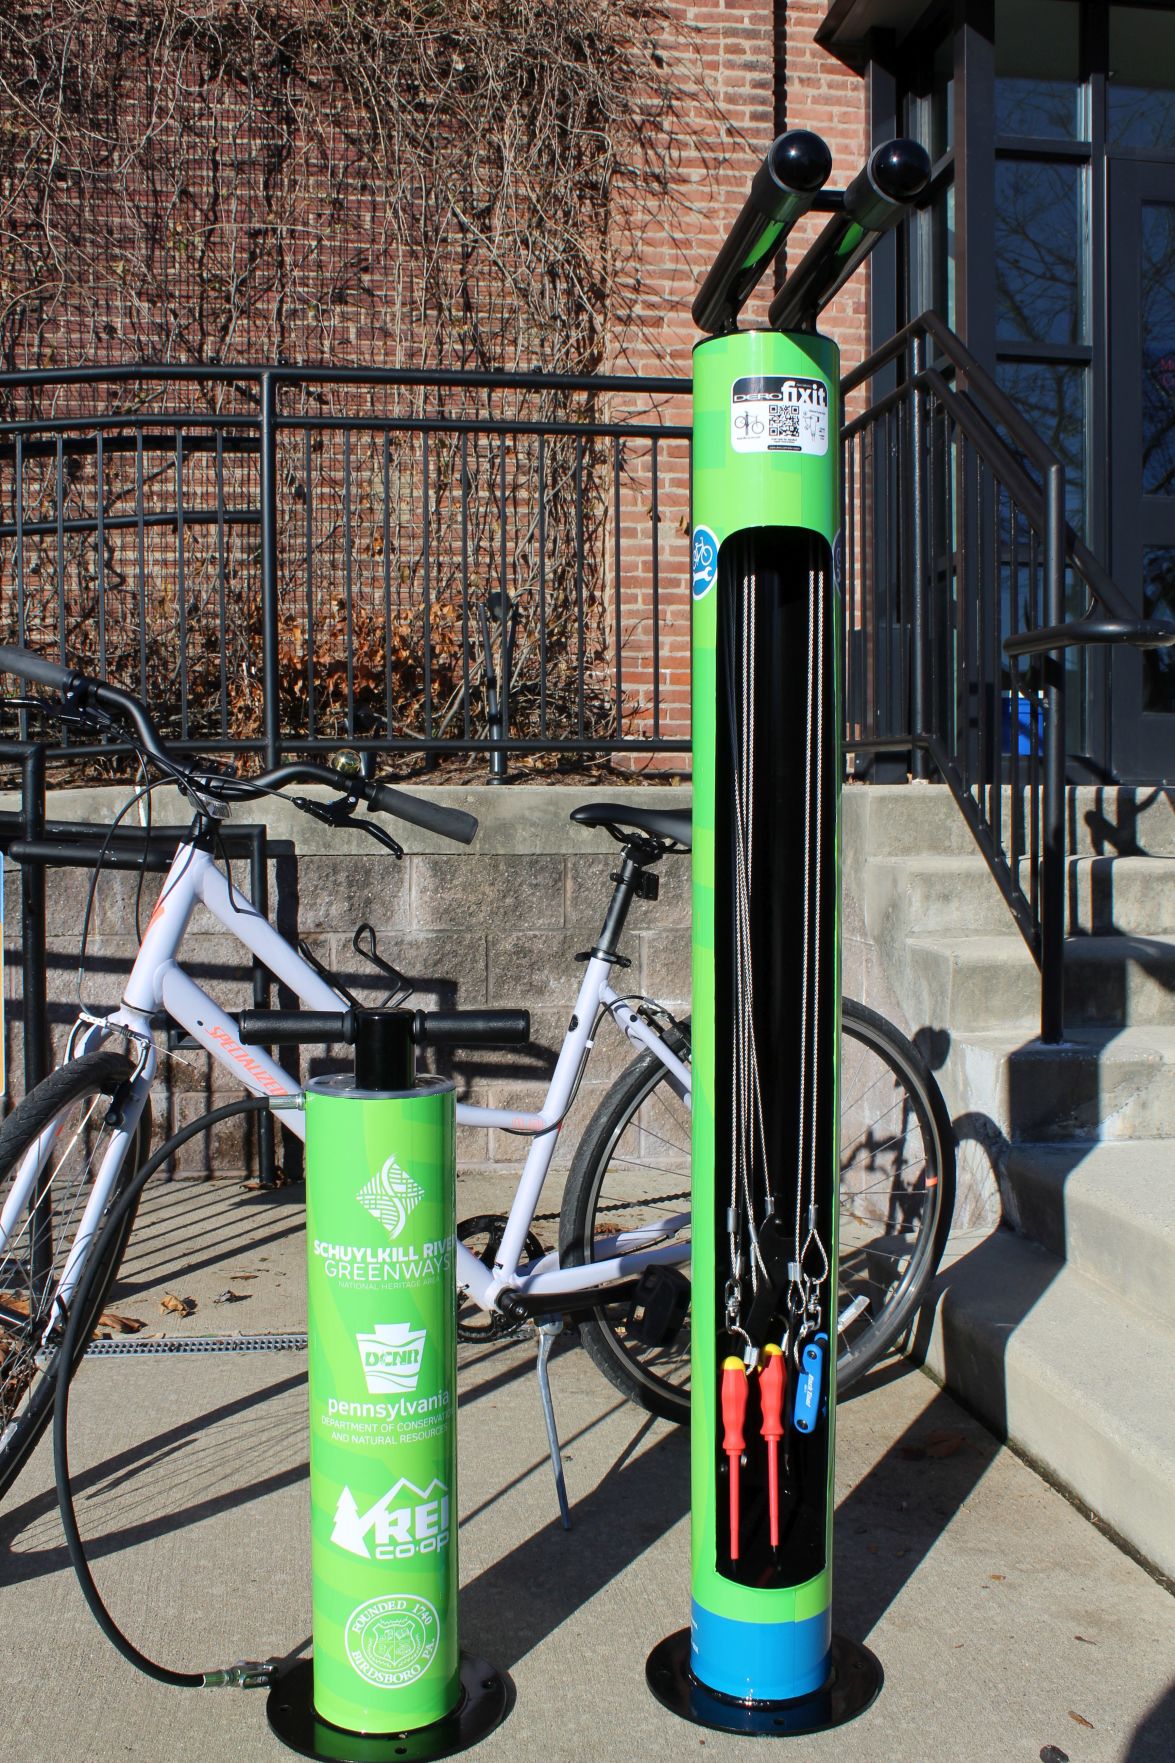 1st of several bicycle repair stations in place on SRT - 5De7D7347068b.image